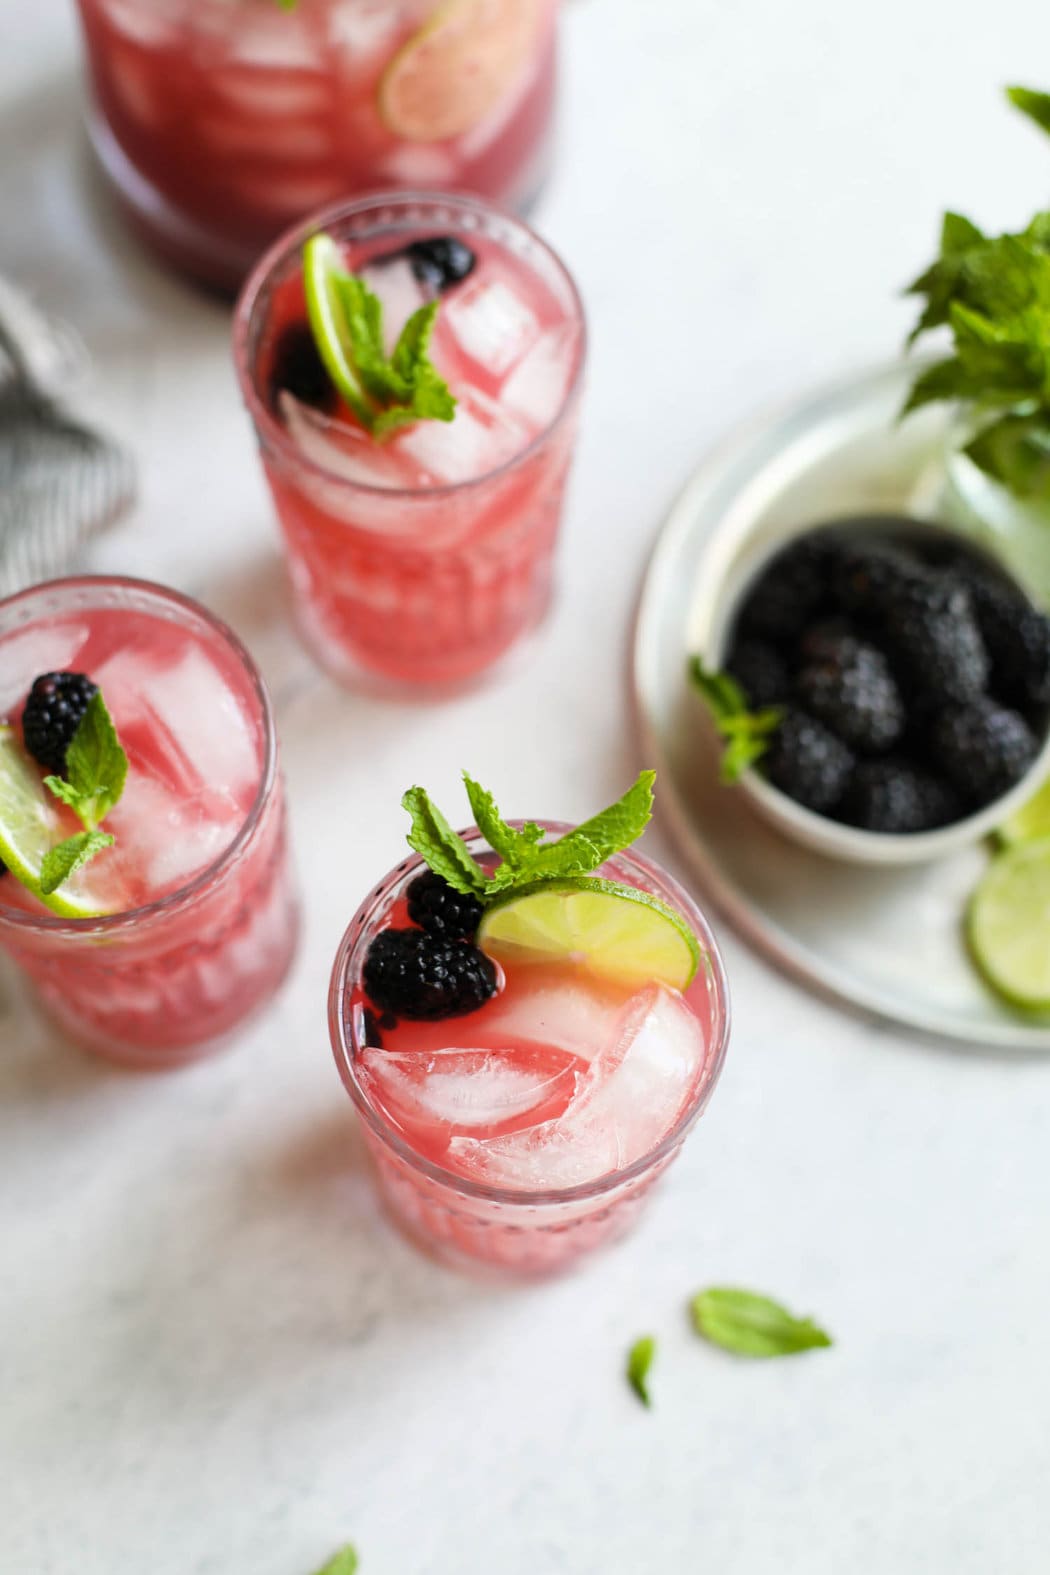 Party Prosecco Cocktails with Summer Berries - Familystyle Food